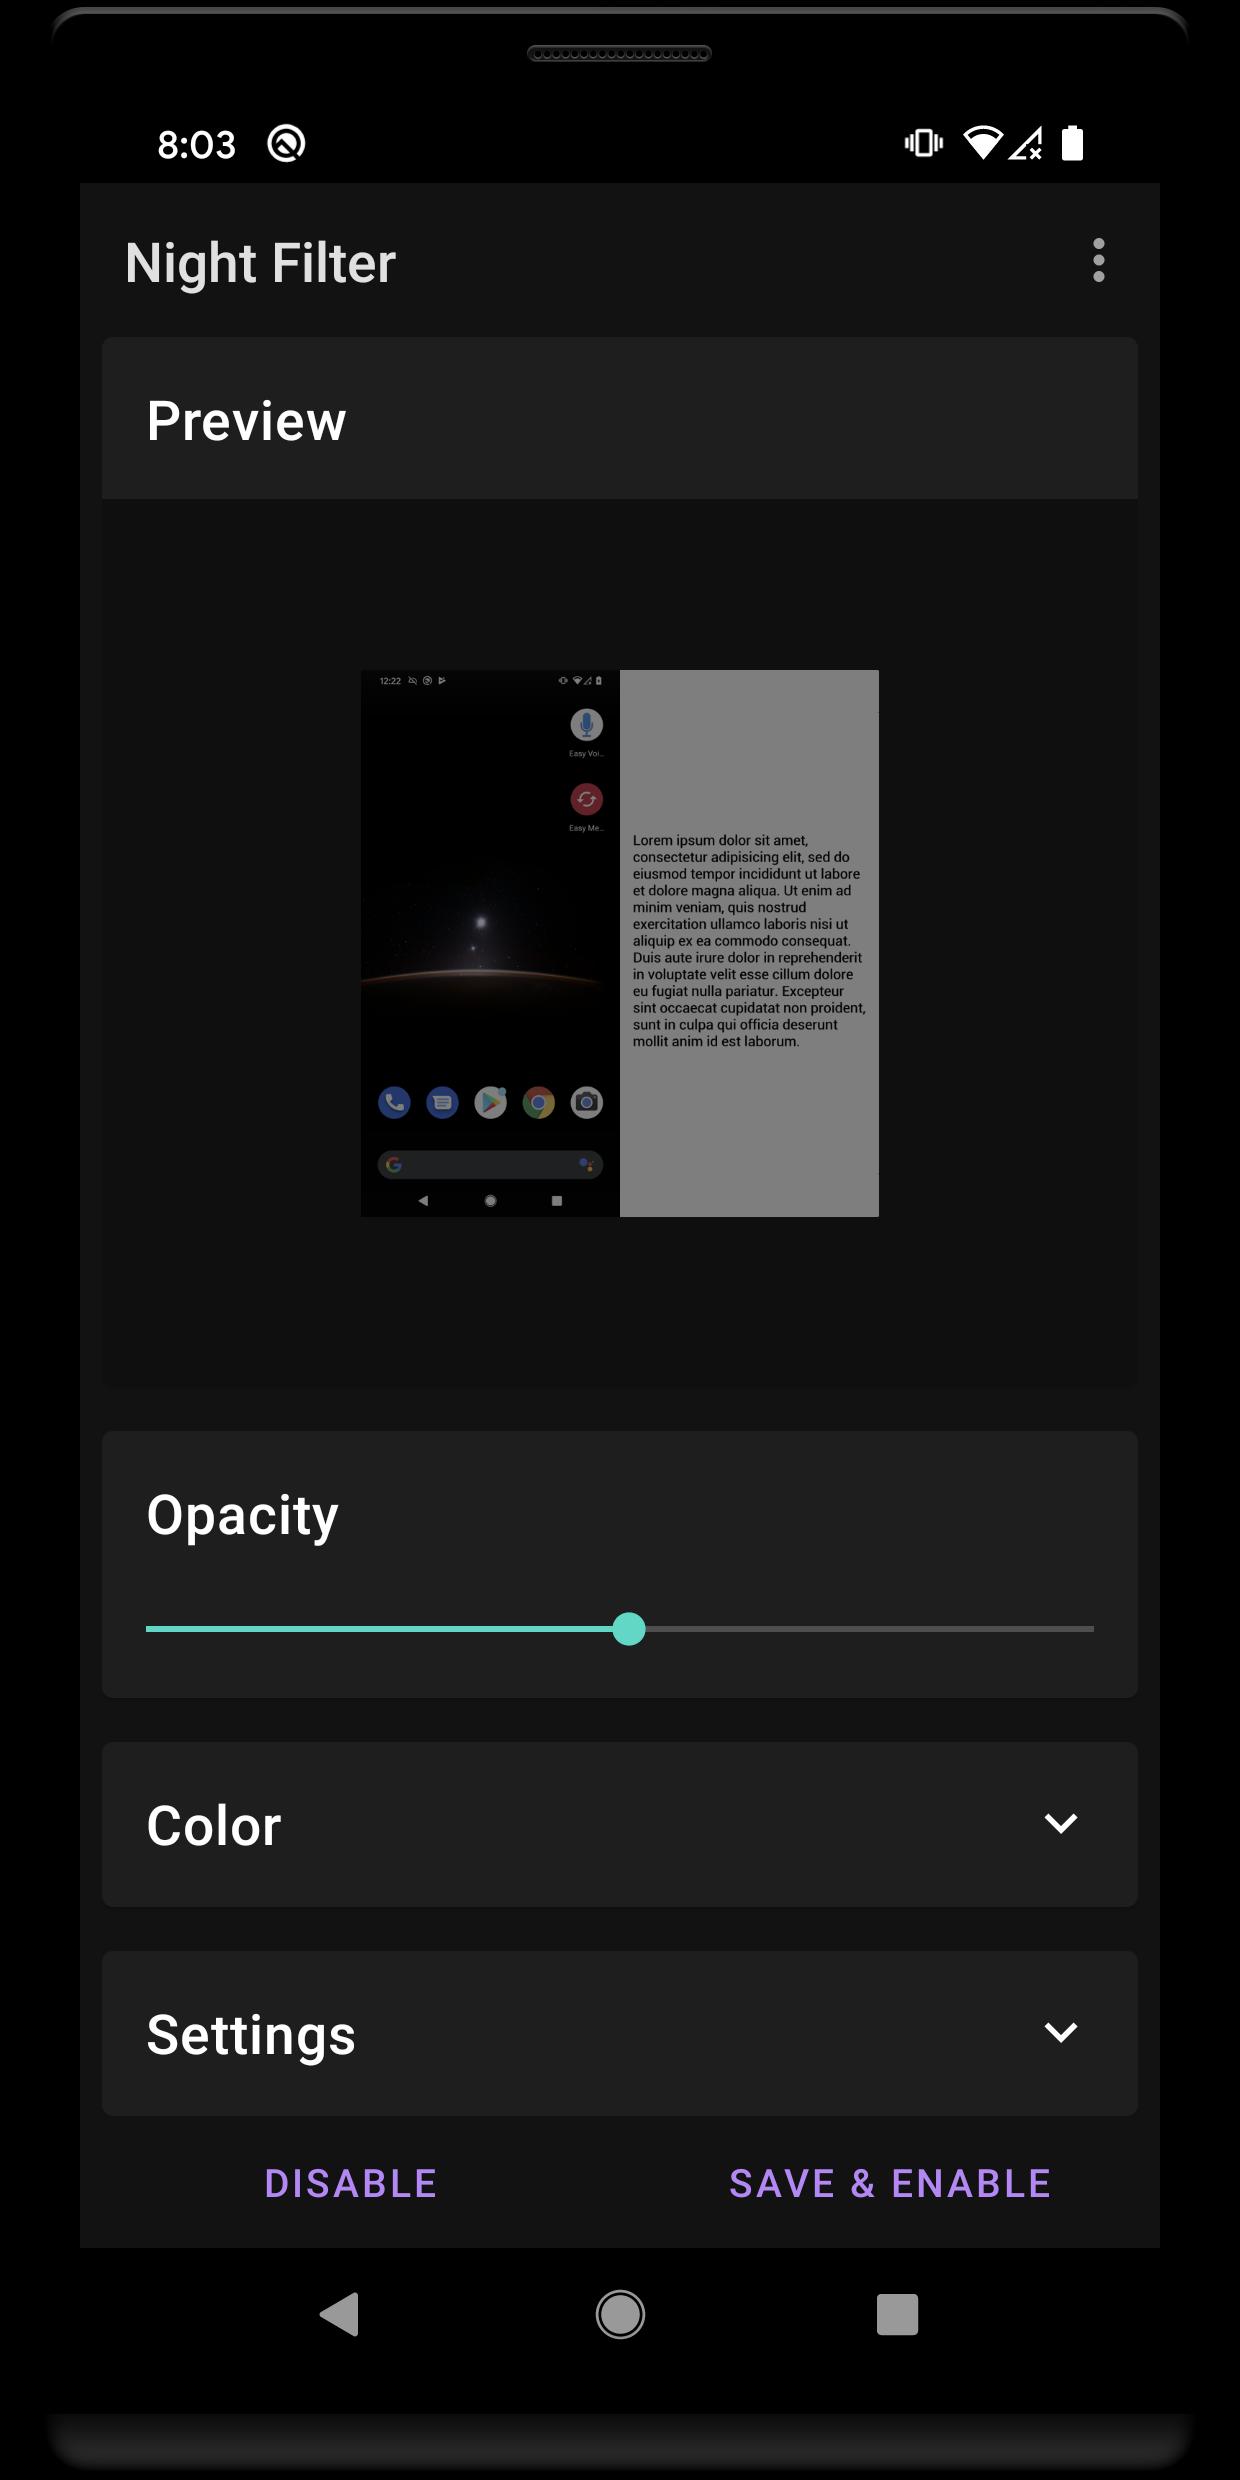 Night Filter for Android - APK Download